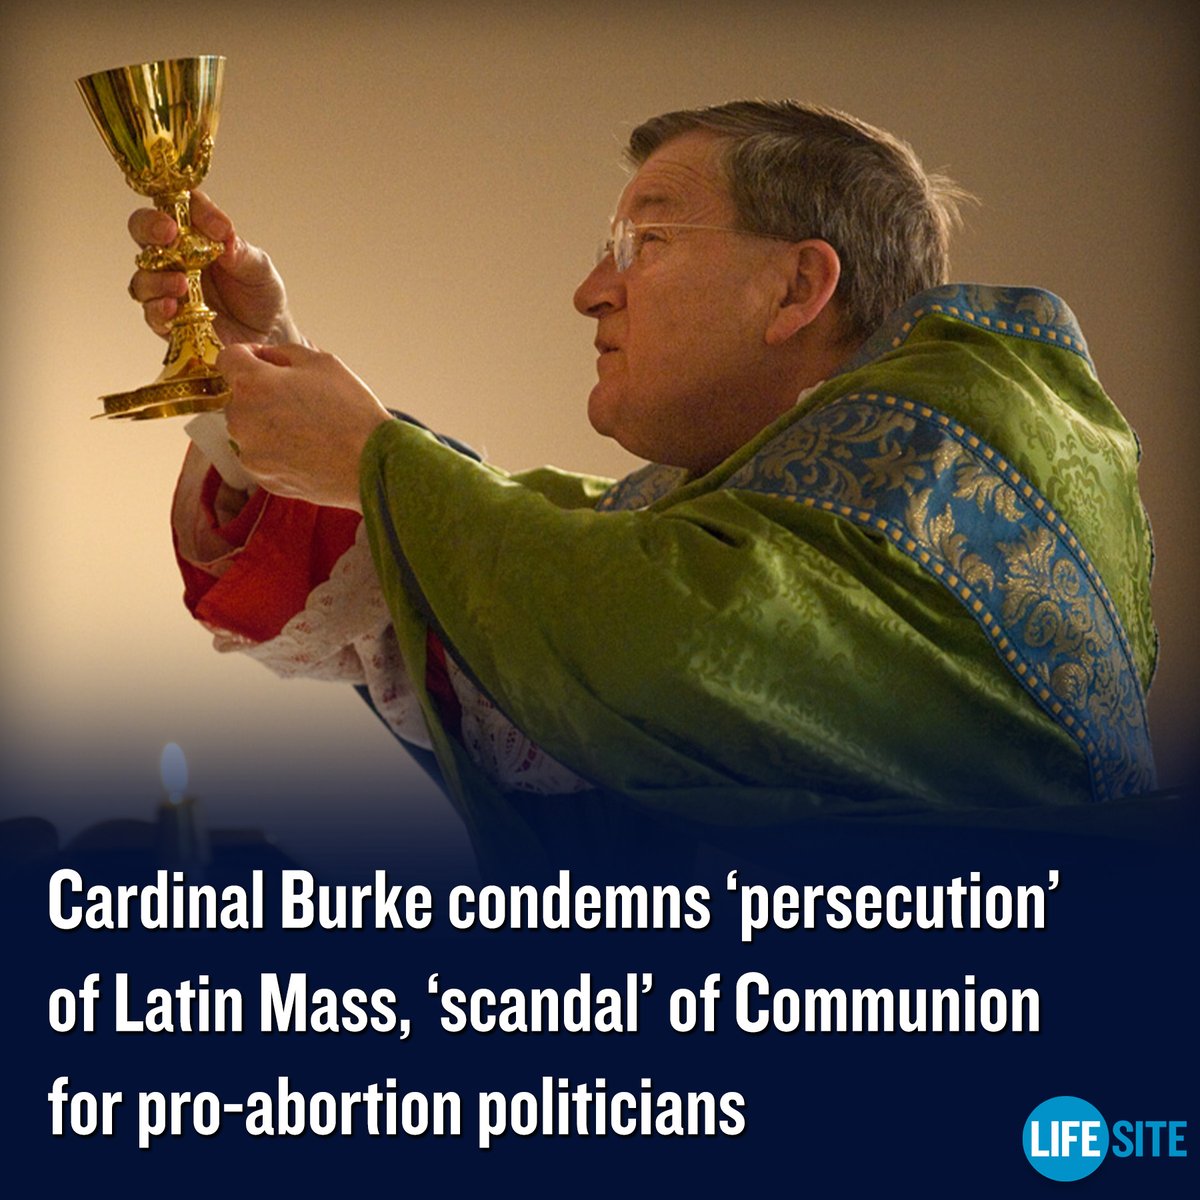 Cardinal Raymond Burke has condemned the practice of giving Holy Communion to pro-abortion politicians while noting that the traditional Mass is in a state of “persecution.”

MORE: lifesitenews.com/news/cardinal-…

#CatholicTwitter #CatholicX #Catholic #LatinMass